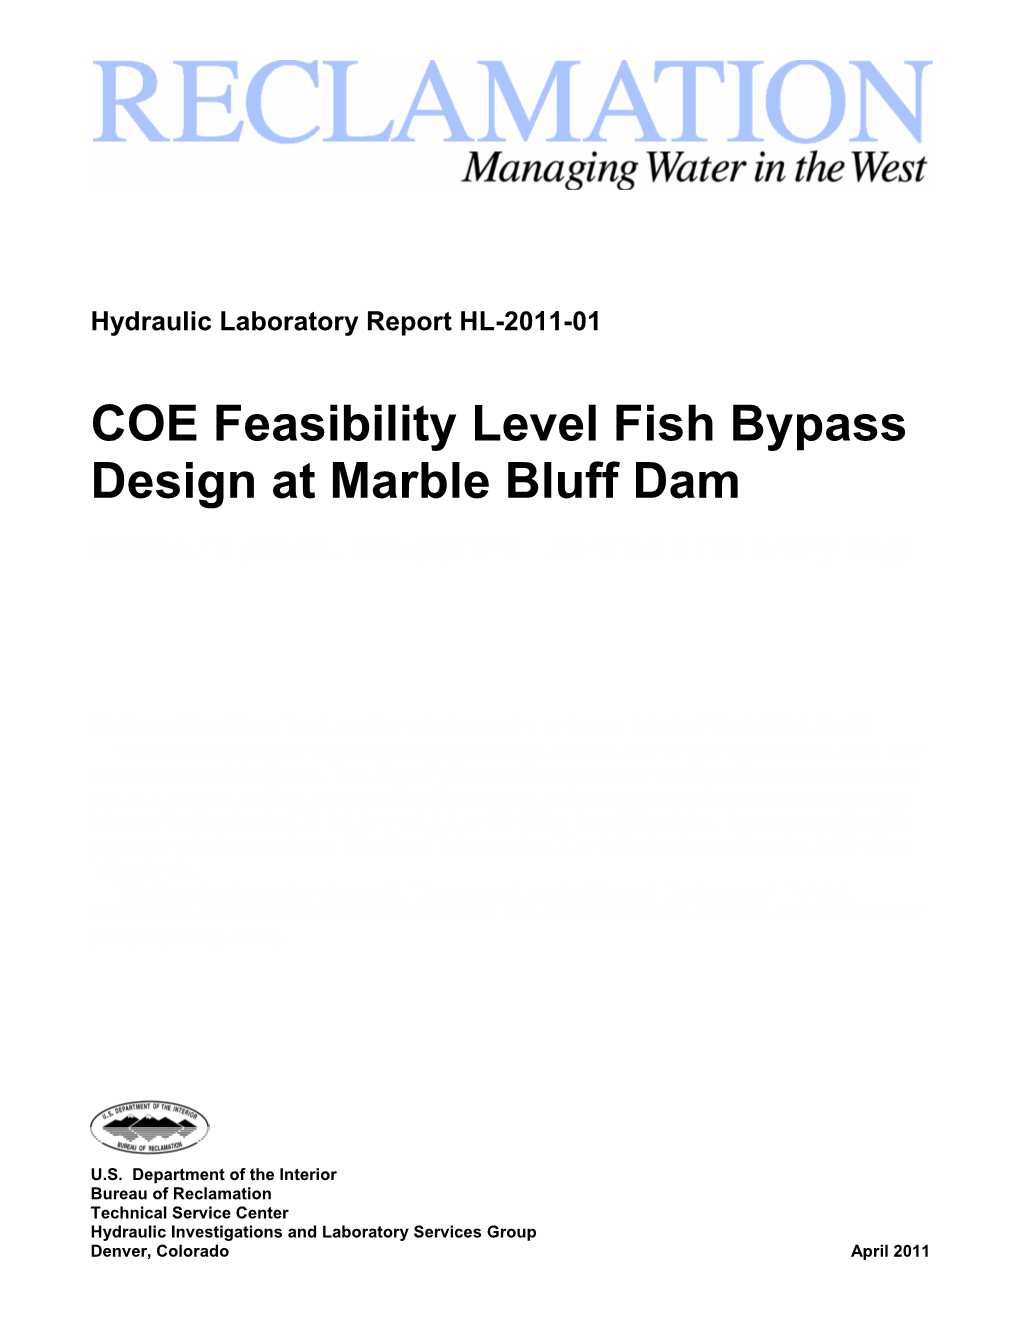 COE Feasibility Level Fish Bypass Design at Marble Bluff Dam